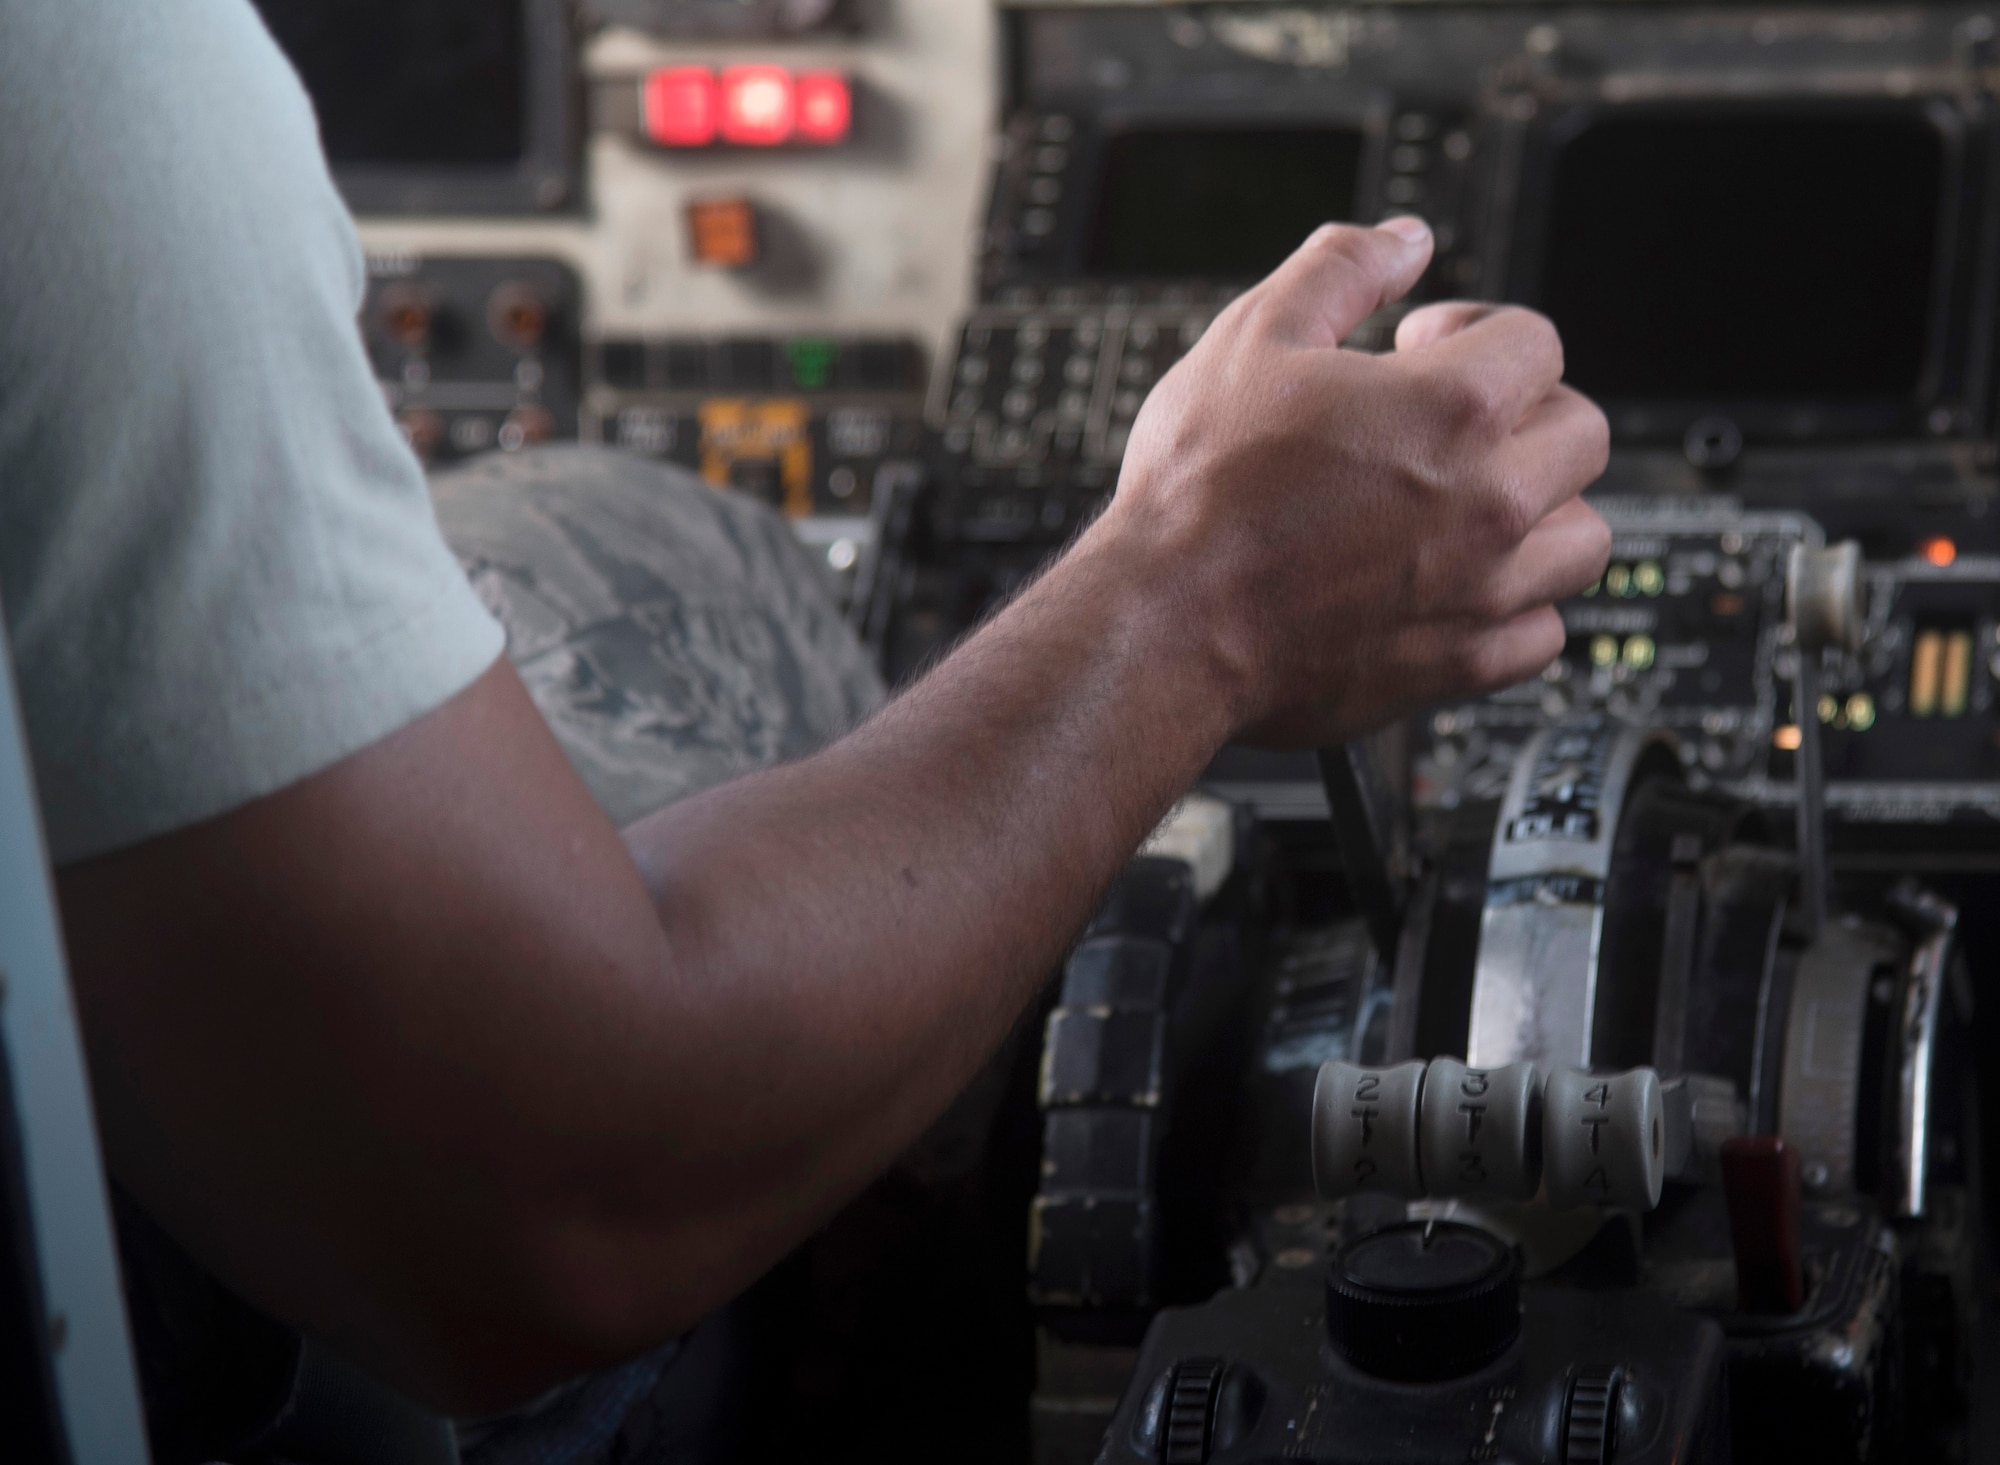 U.S. Air Force Senior Airman Jose Gonzalez, a crew chief assigned to the 6th Aircraft Maintenance Squadron, runs the engines on a KC-135 Stratotanker aircraft during his final task for the KC-135R/T Flightline F108 Engine Operator course at MacDill Air Force Base, Fla., July 14, 2017. During the course, students are taught how to perform an internal and external pre-start check which ensures equipment is properly set up before and after an engine run. (U.S. Air Force photo by Airman 1st Class Ashley Perdue)